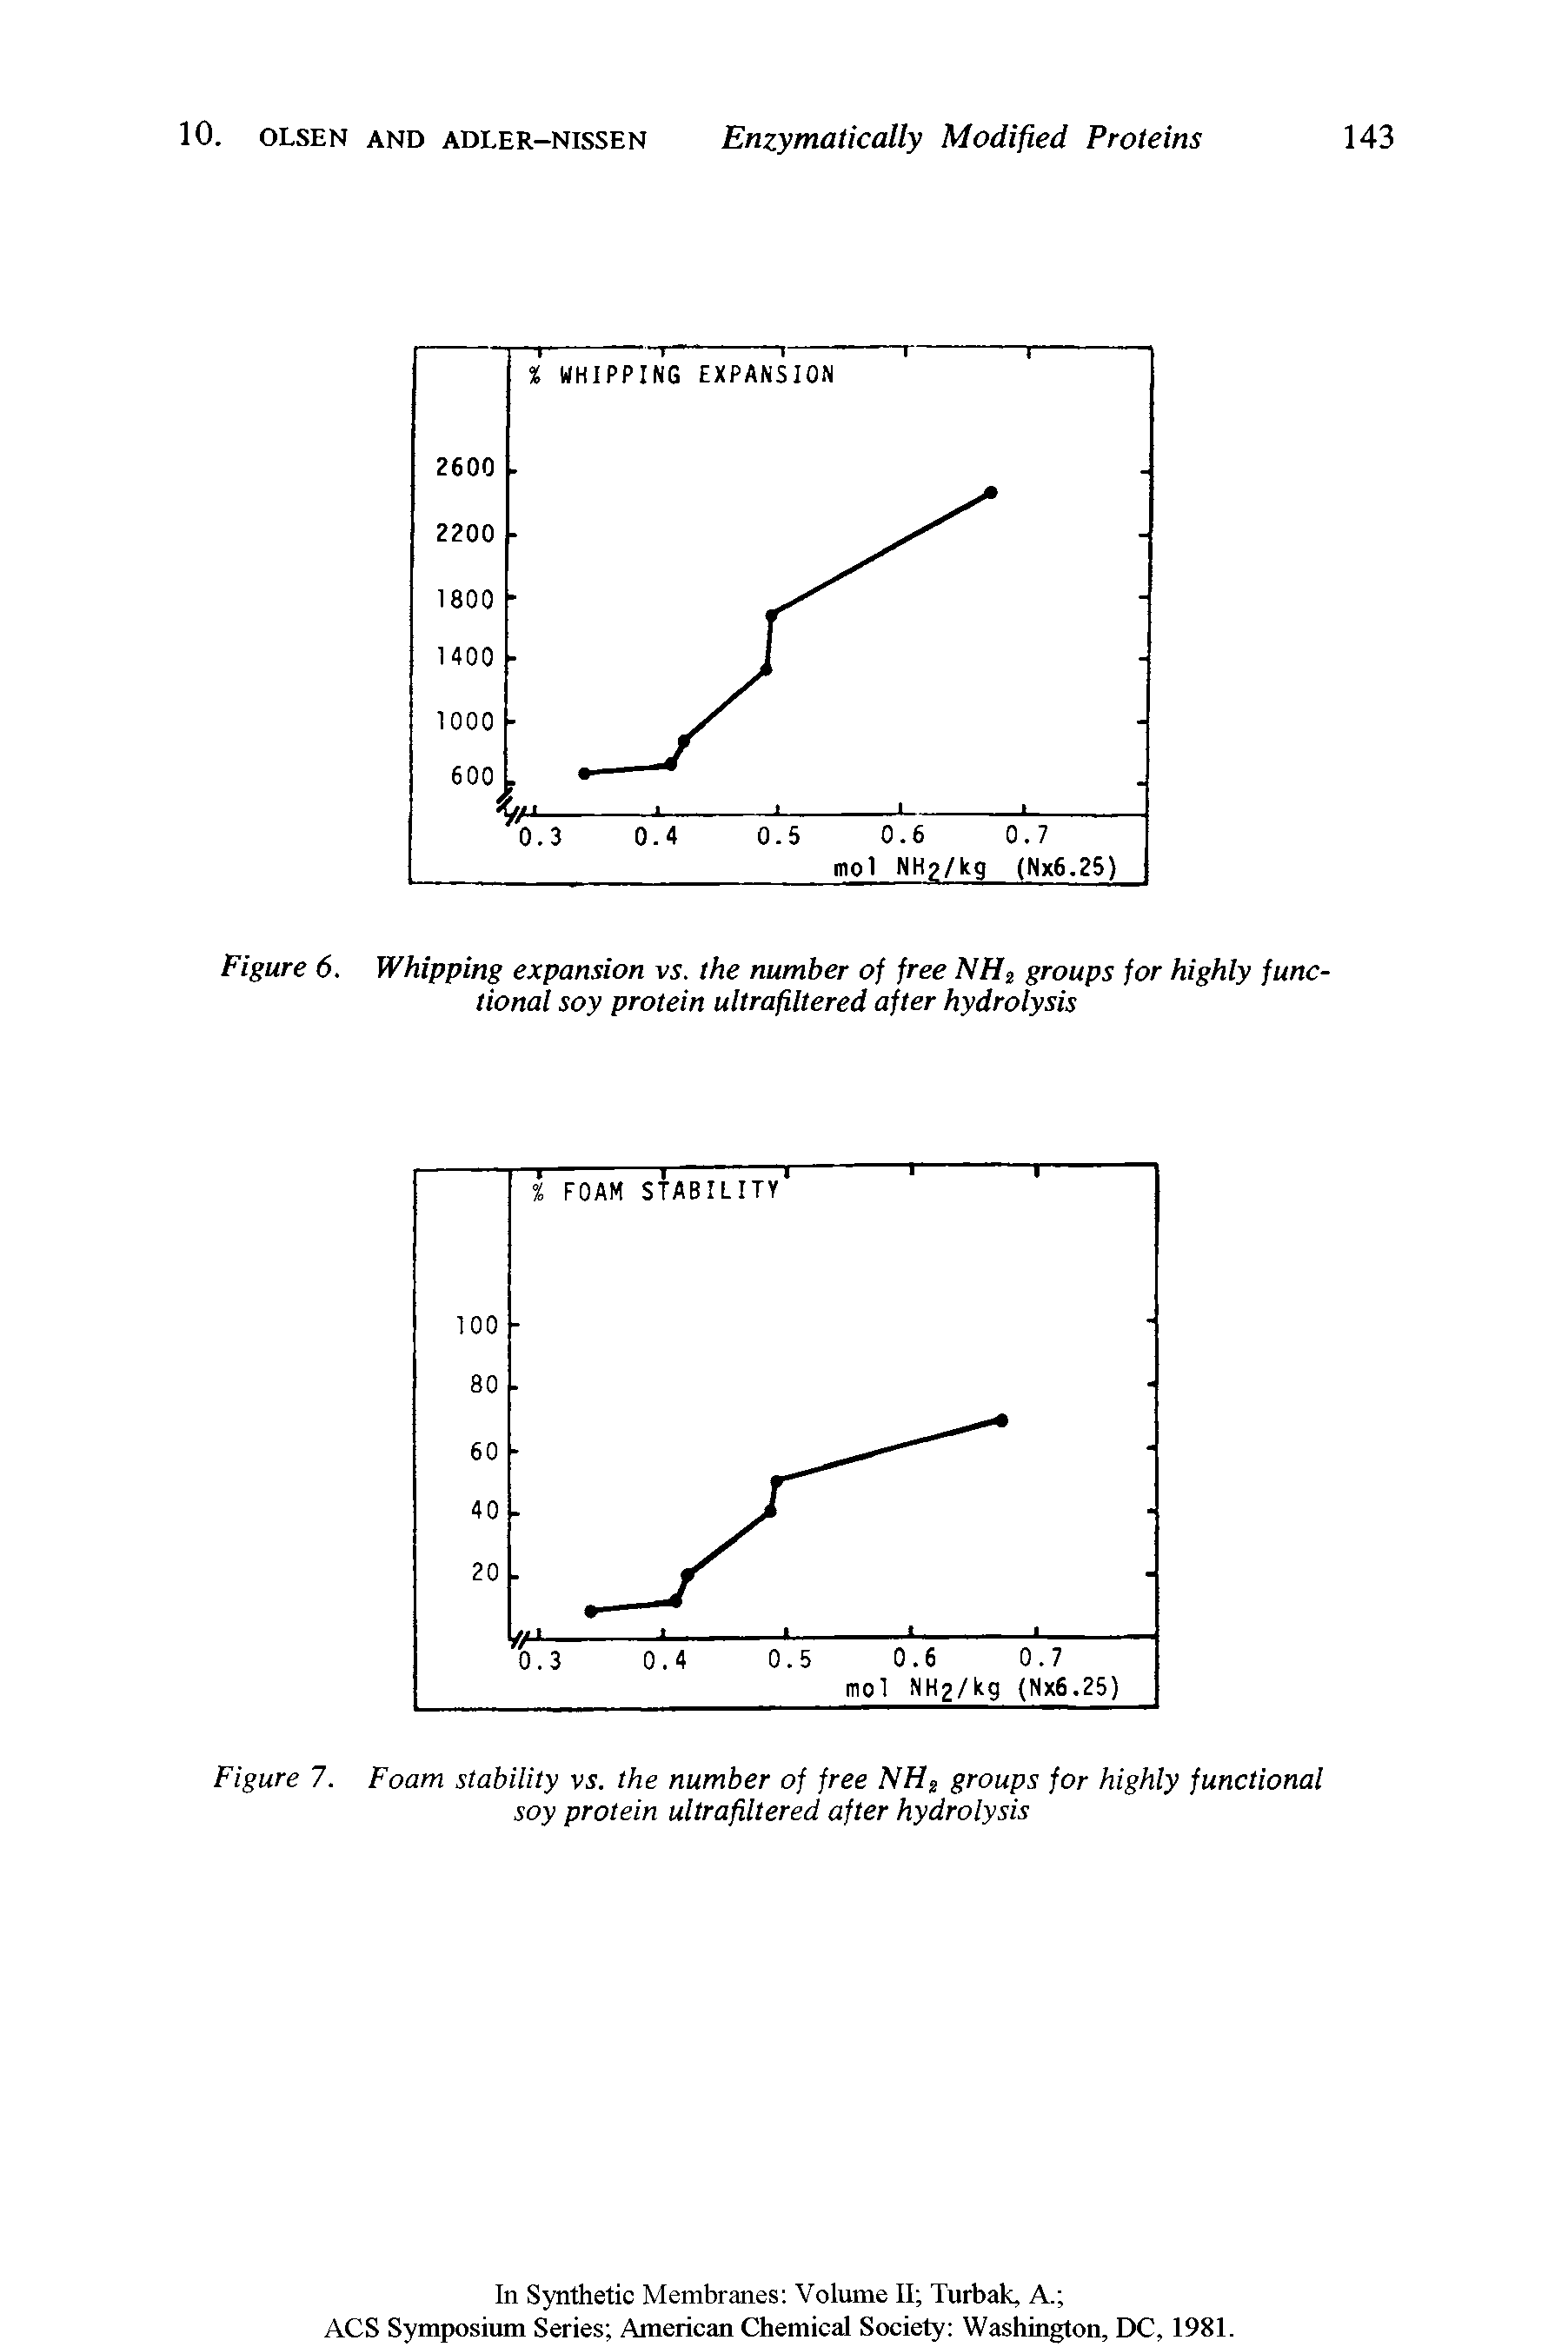 Figure 6. Whipping expansion vs. the number of free NH groups for highly functional soy protein ultrafiltered after hydrolysis...